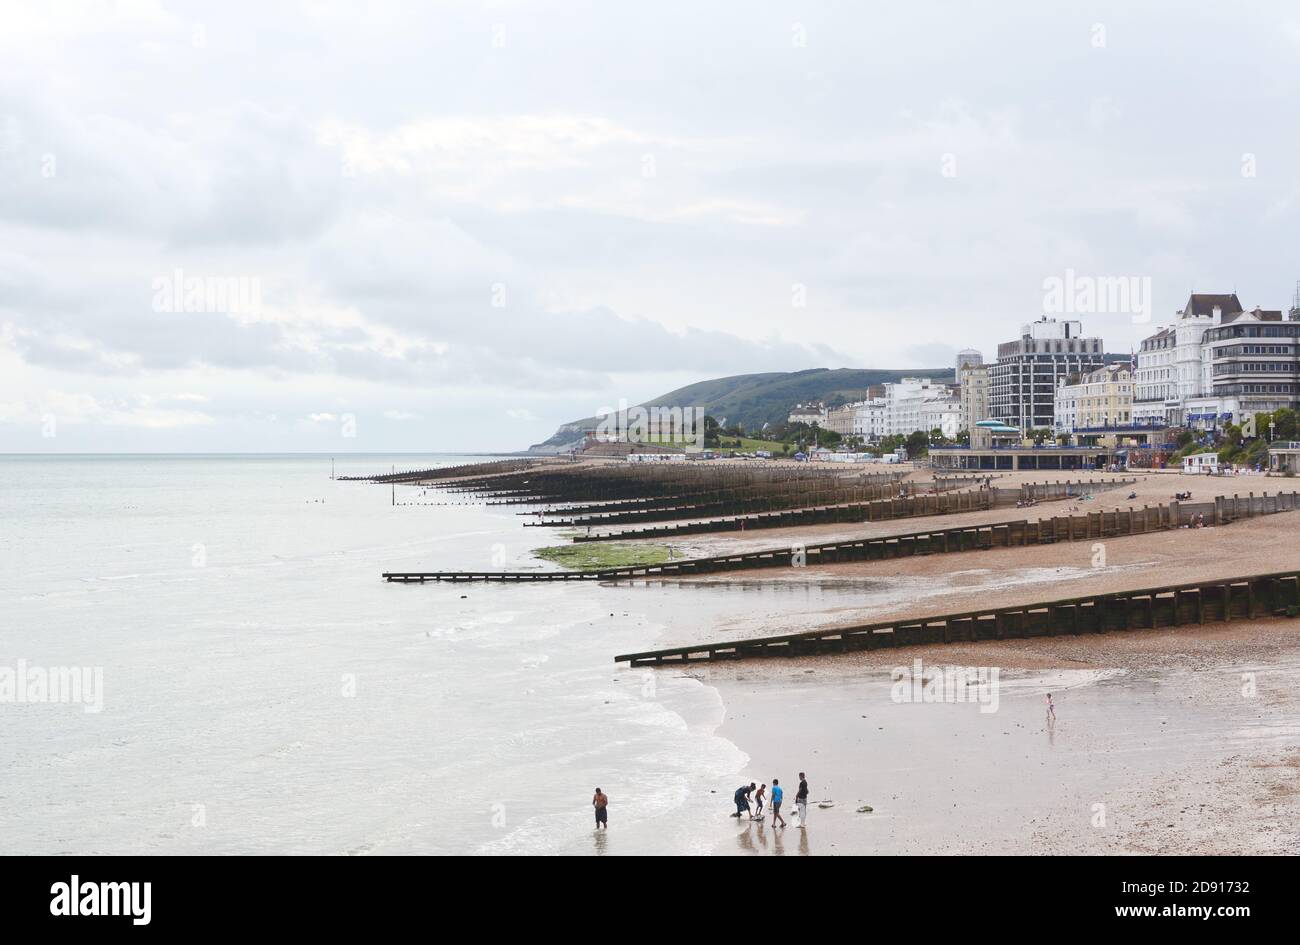 EASTBOURNE, UK - AUGUST 28, 2019: View of Eastbourne beach in East Sussex, from the pier to Redoubt fortress at the end of Royal Parade on August 28, Stock Photo